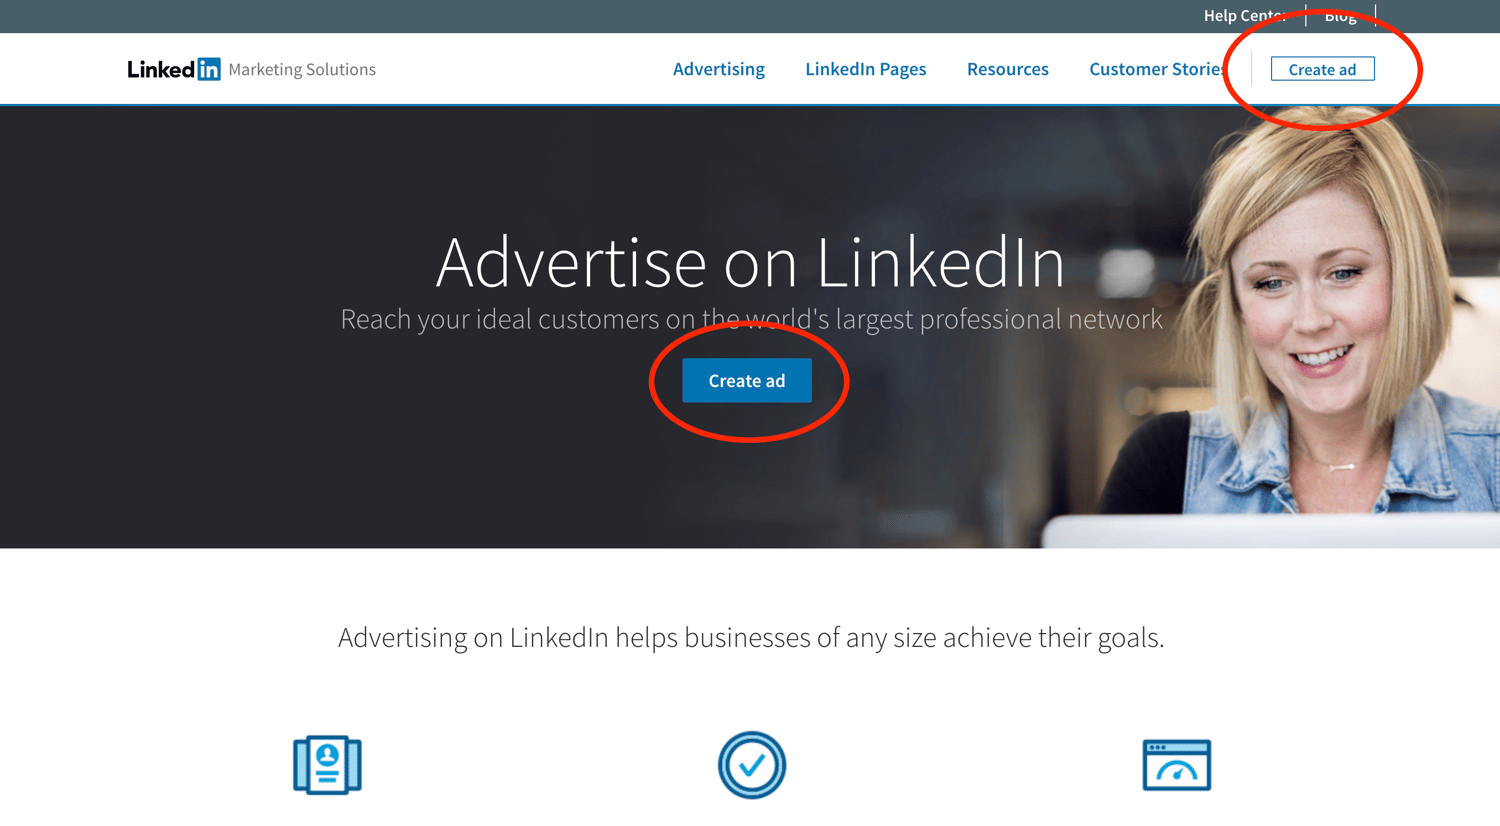 How to Run LinkedIn Ad Campaigns: A Beginner's Guide